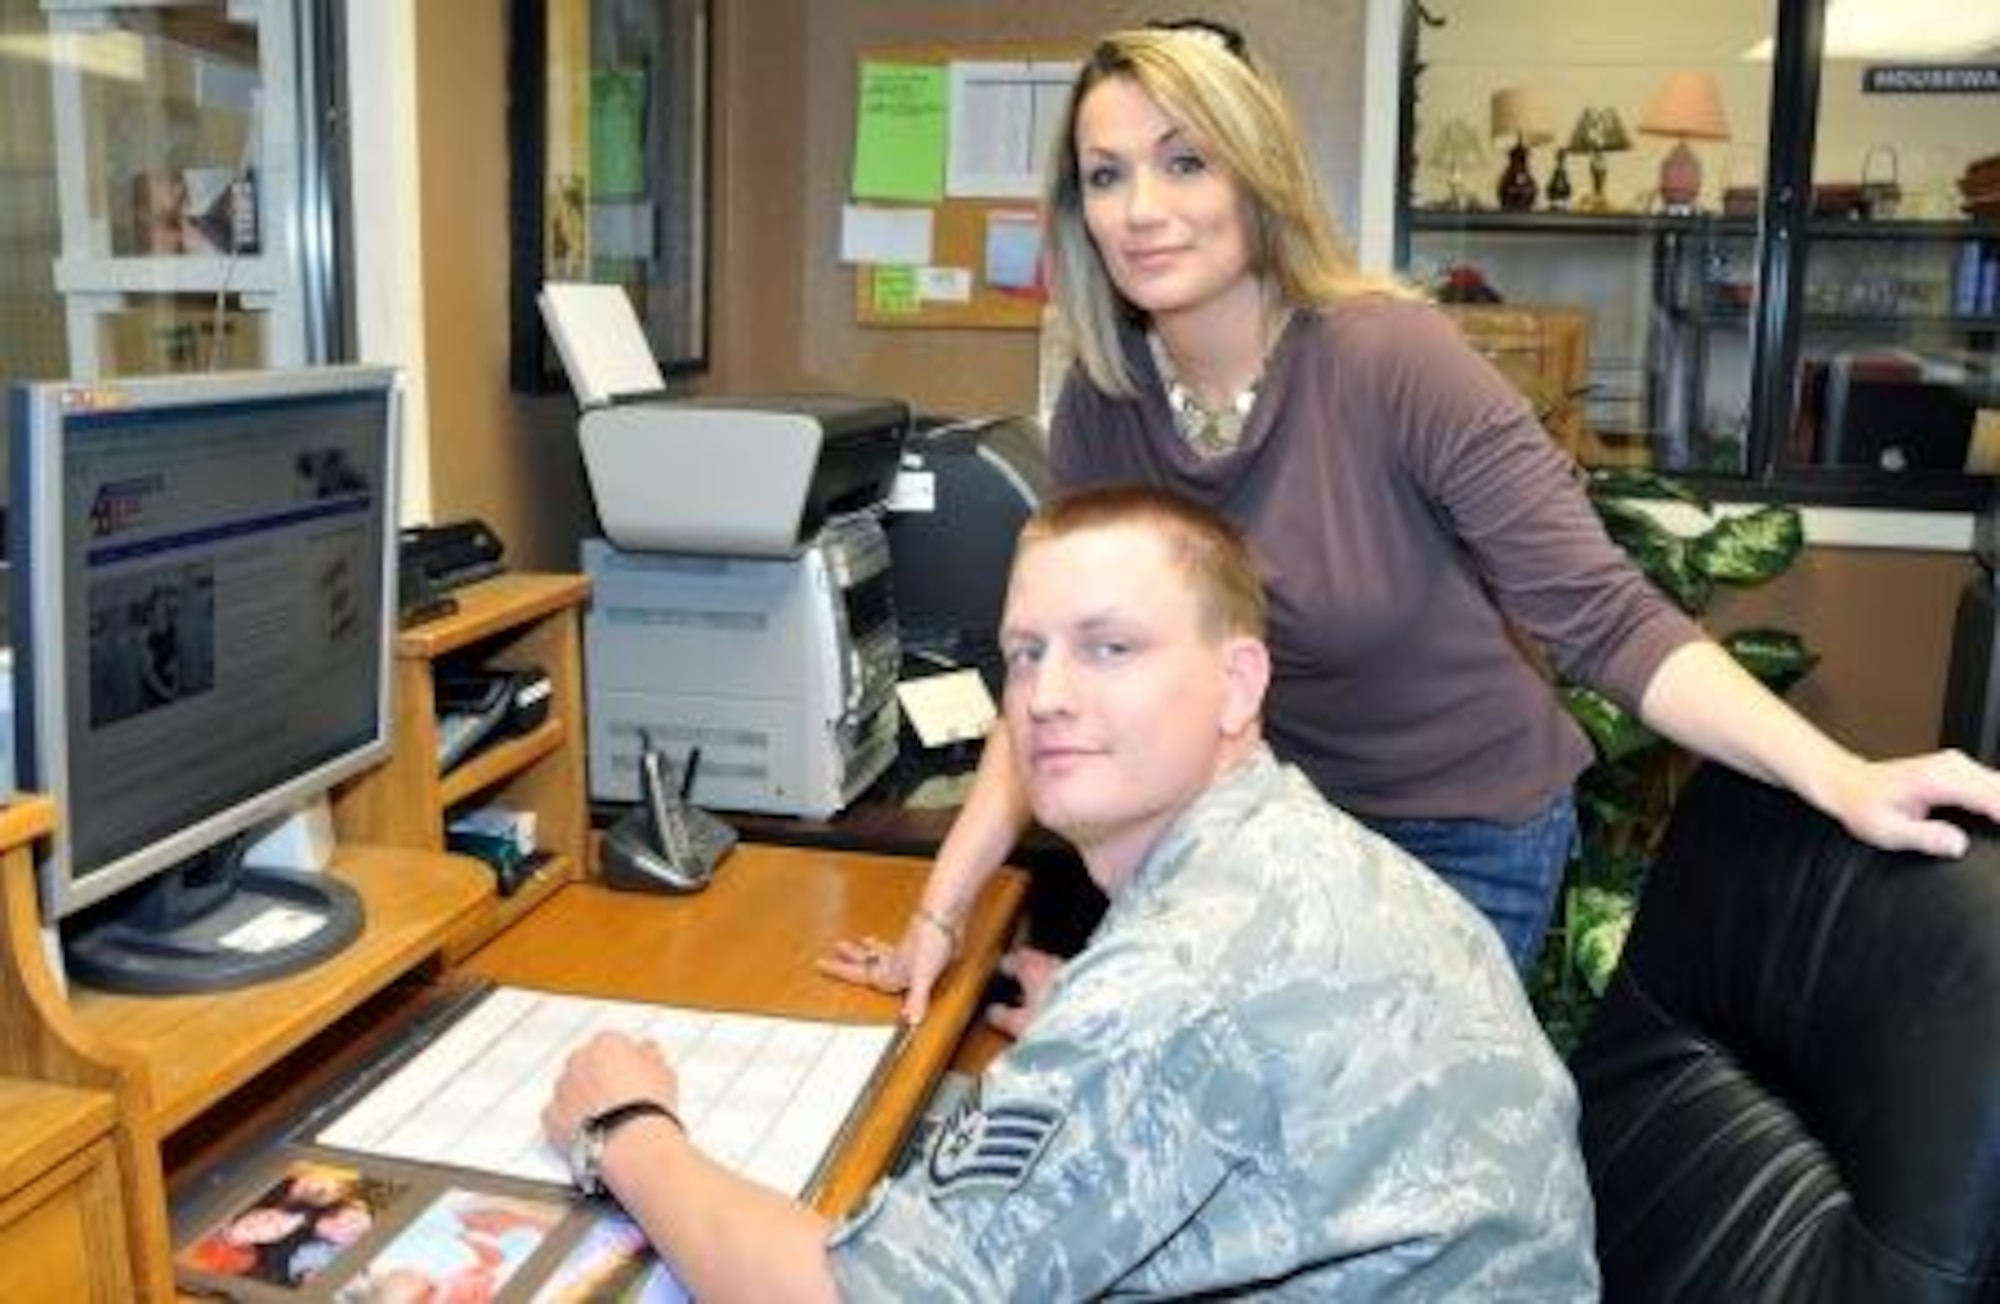 Staff Sgt. Nathan Peterson demonstrates the features of the Airman’s Attic Directory website to Misty Hauge, Kirtland Air Force Base, N.M., Airman’s Attic Director. The website is designed to be a one stop shop for information about Airman's Attics across the Air Force.